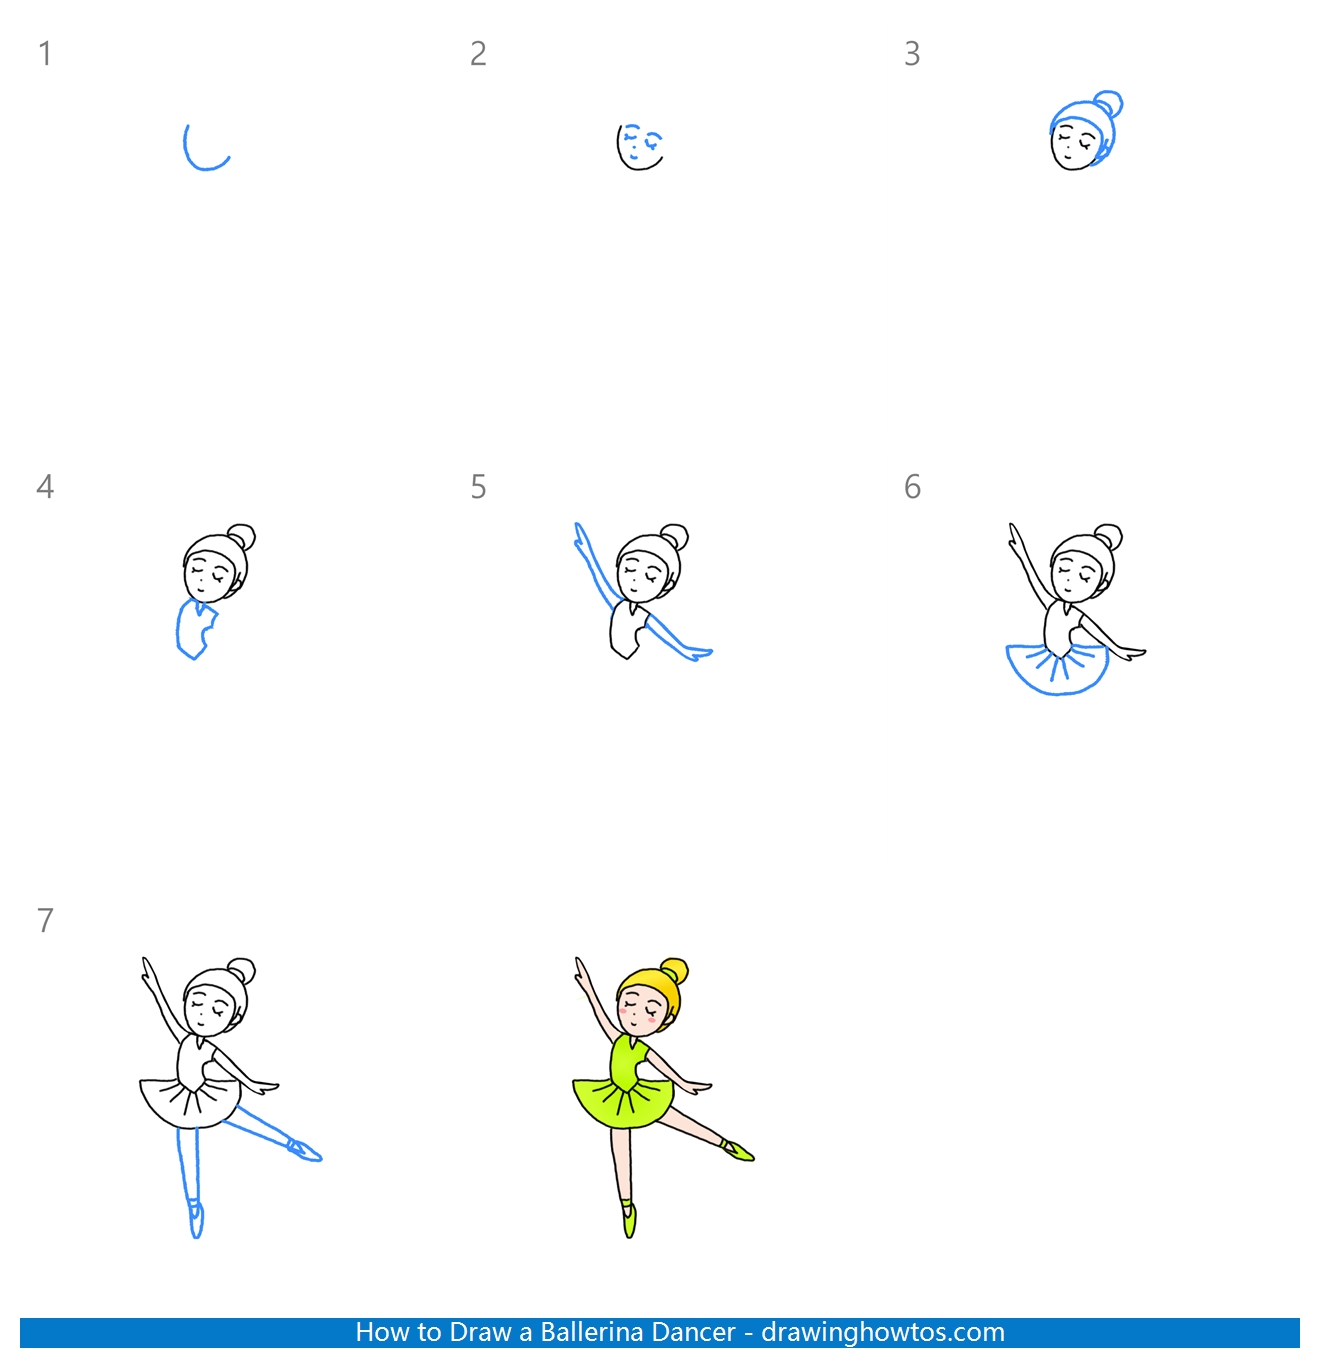 Howto Draw a Girl Dancer Step by Step